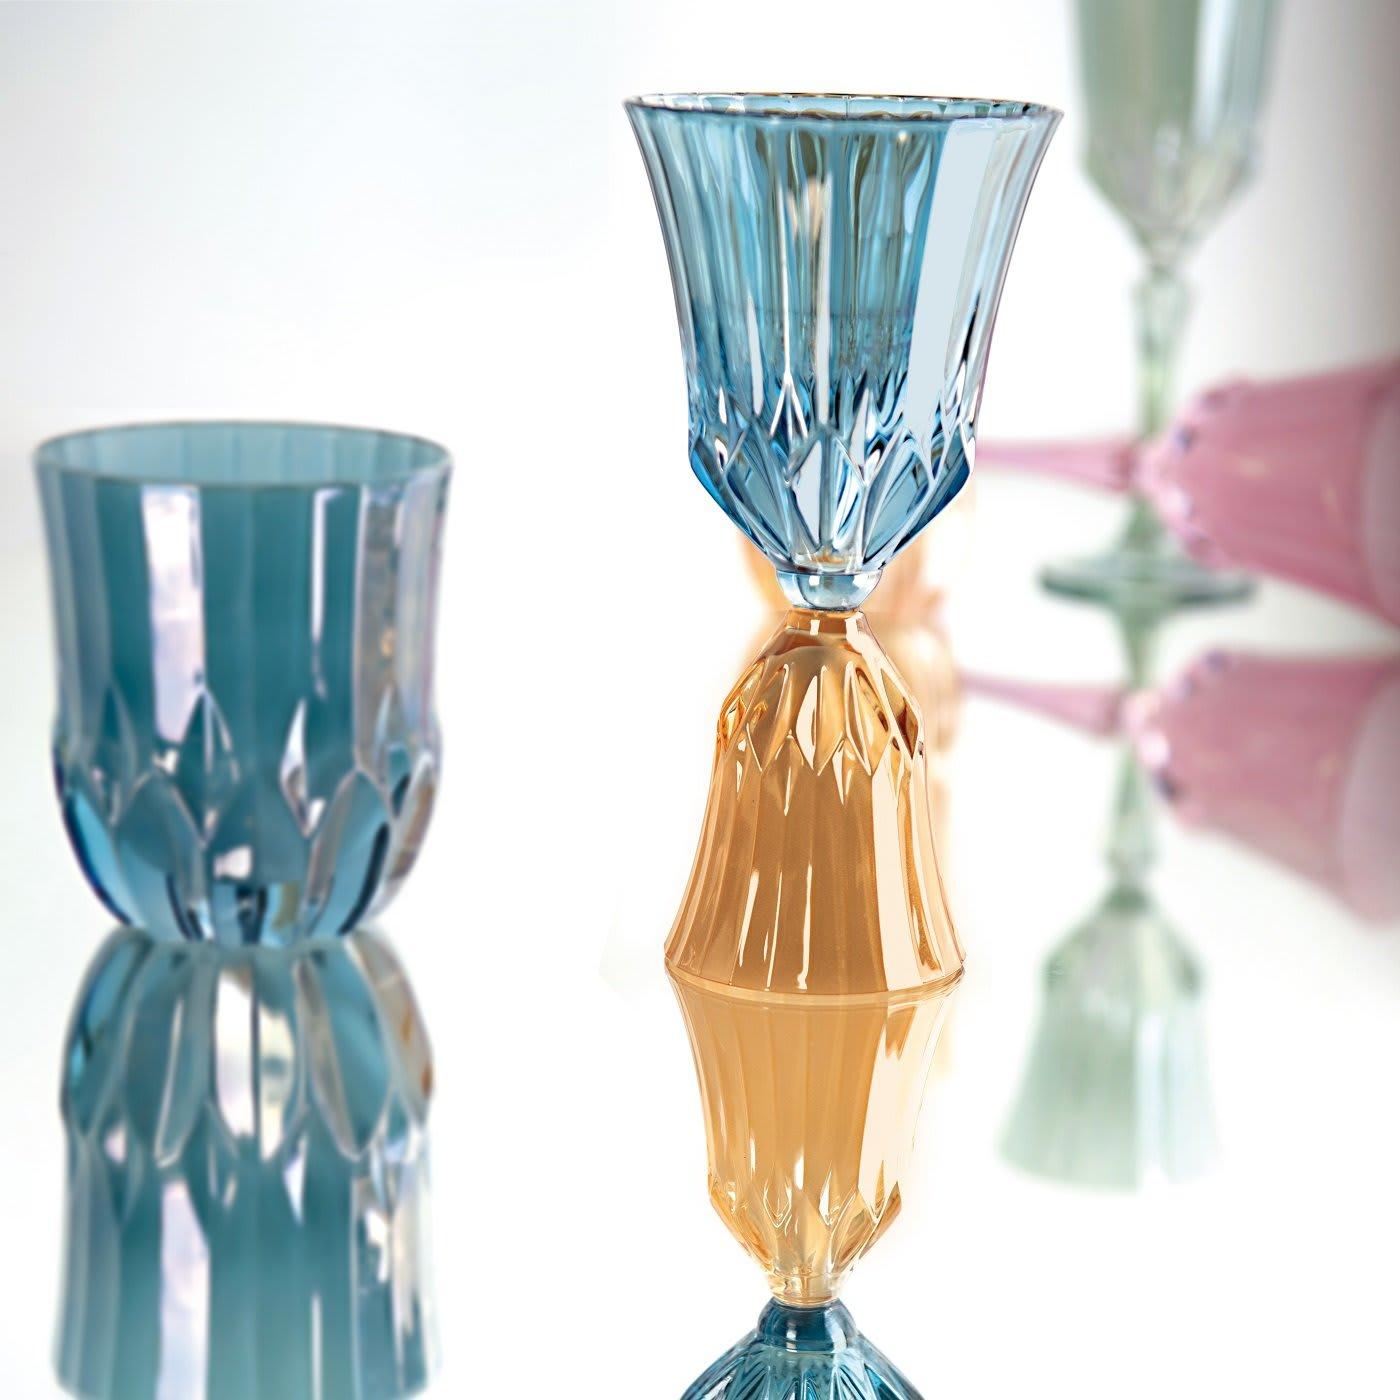 A striking showcase of craftsmanship, each water glass of this set of six boasts a low profile entirely crafted by hand, enriched with exquisite engravings. Composed of six different colors, this set is part of the Riflessi Collection of refined